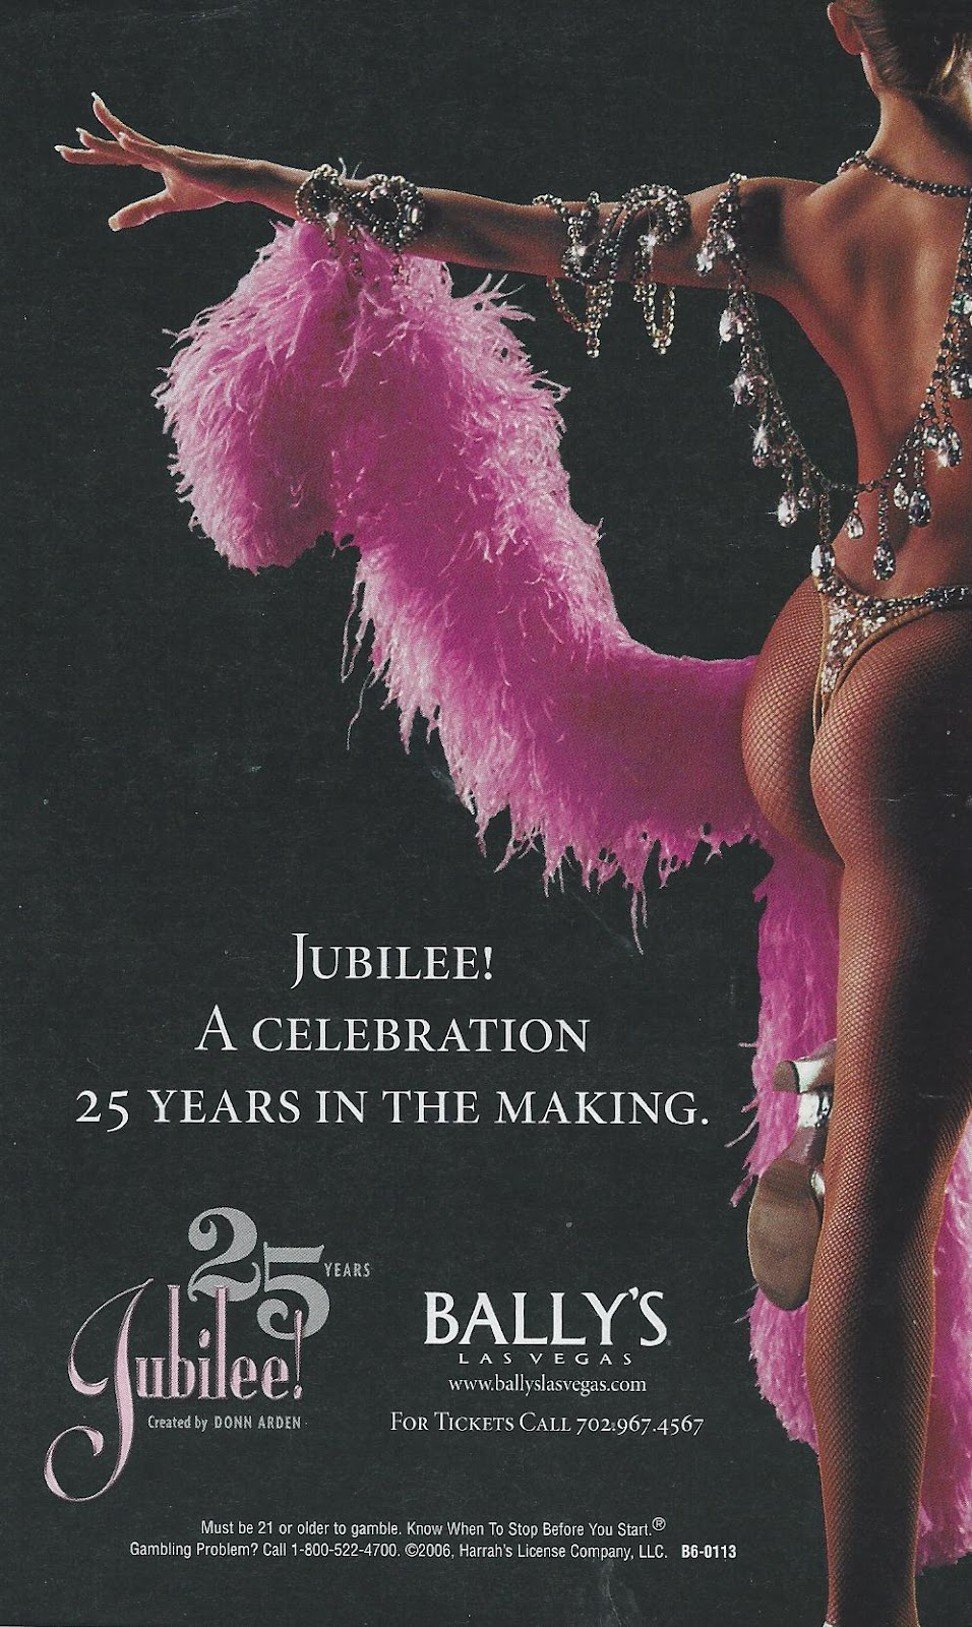 A poster for Jubilee.